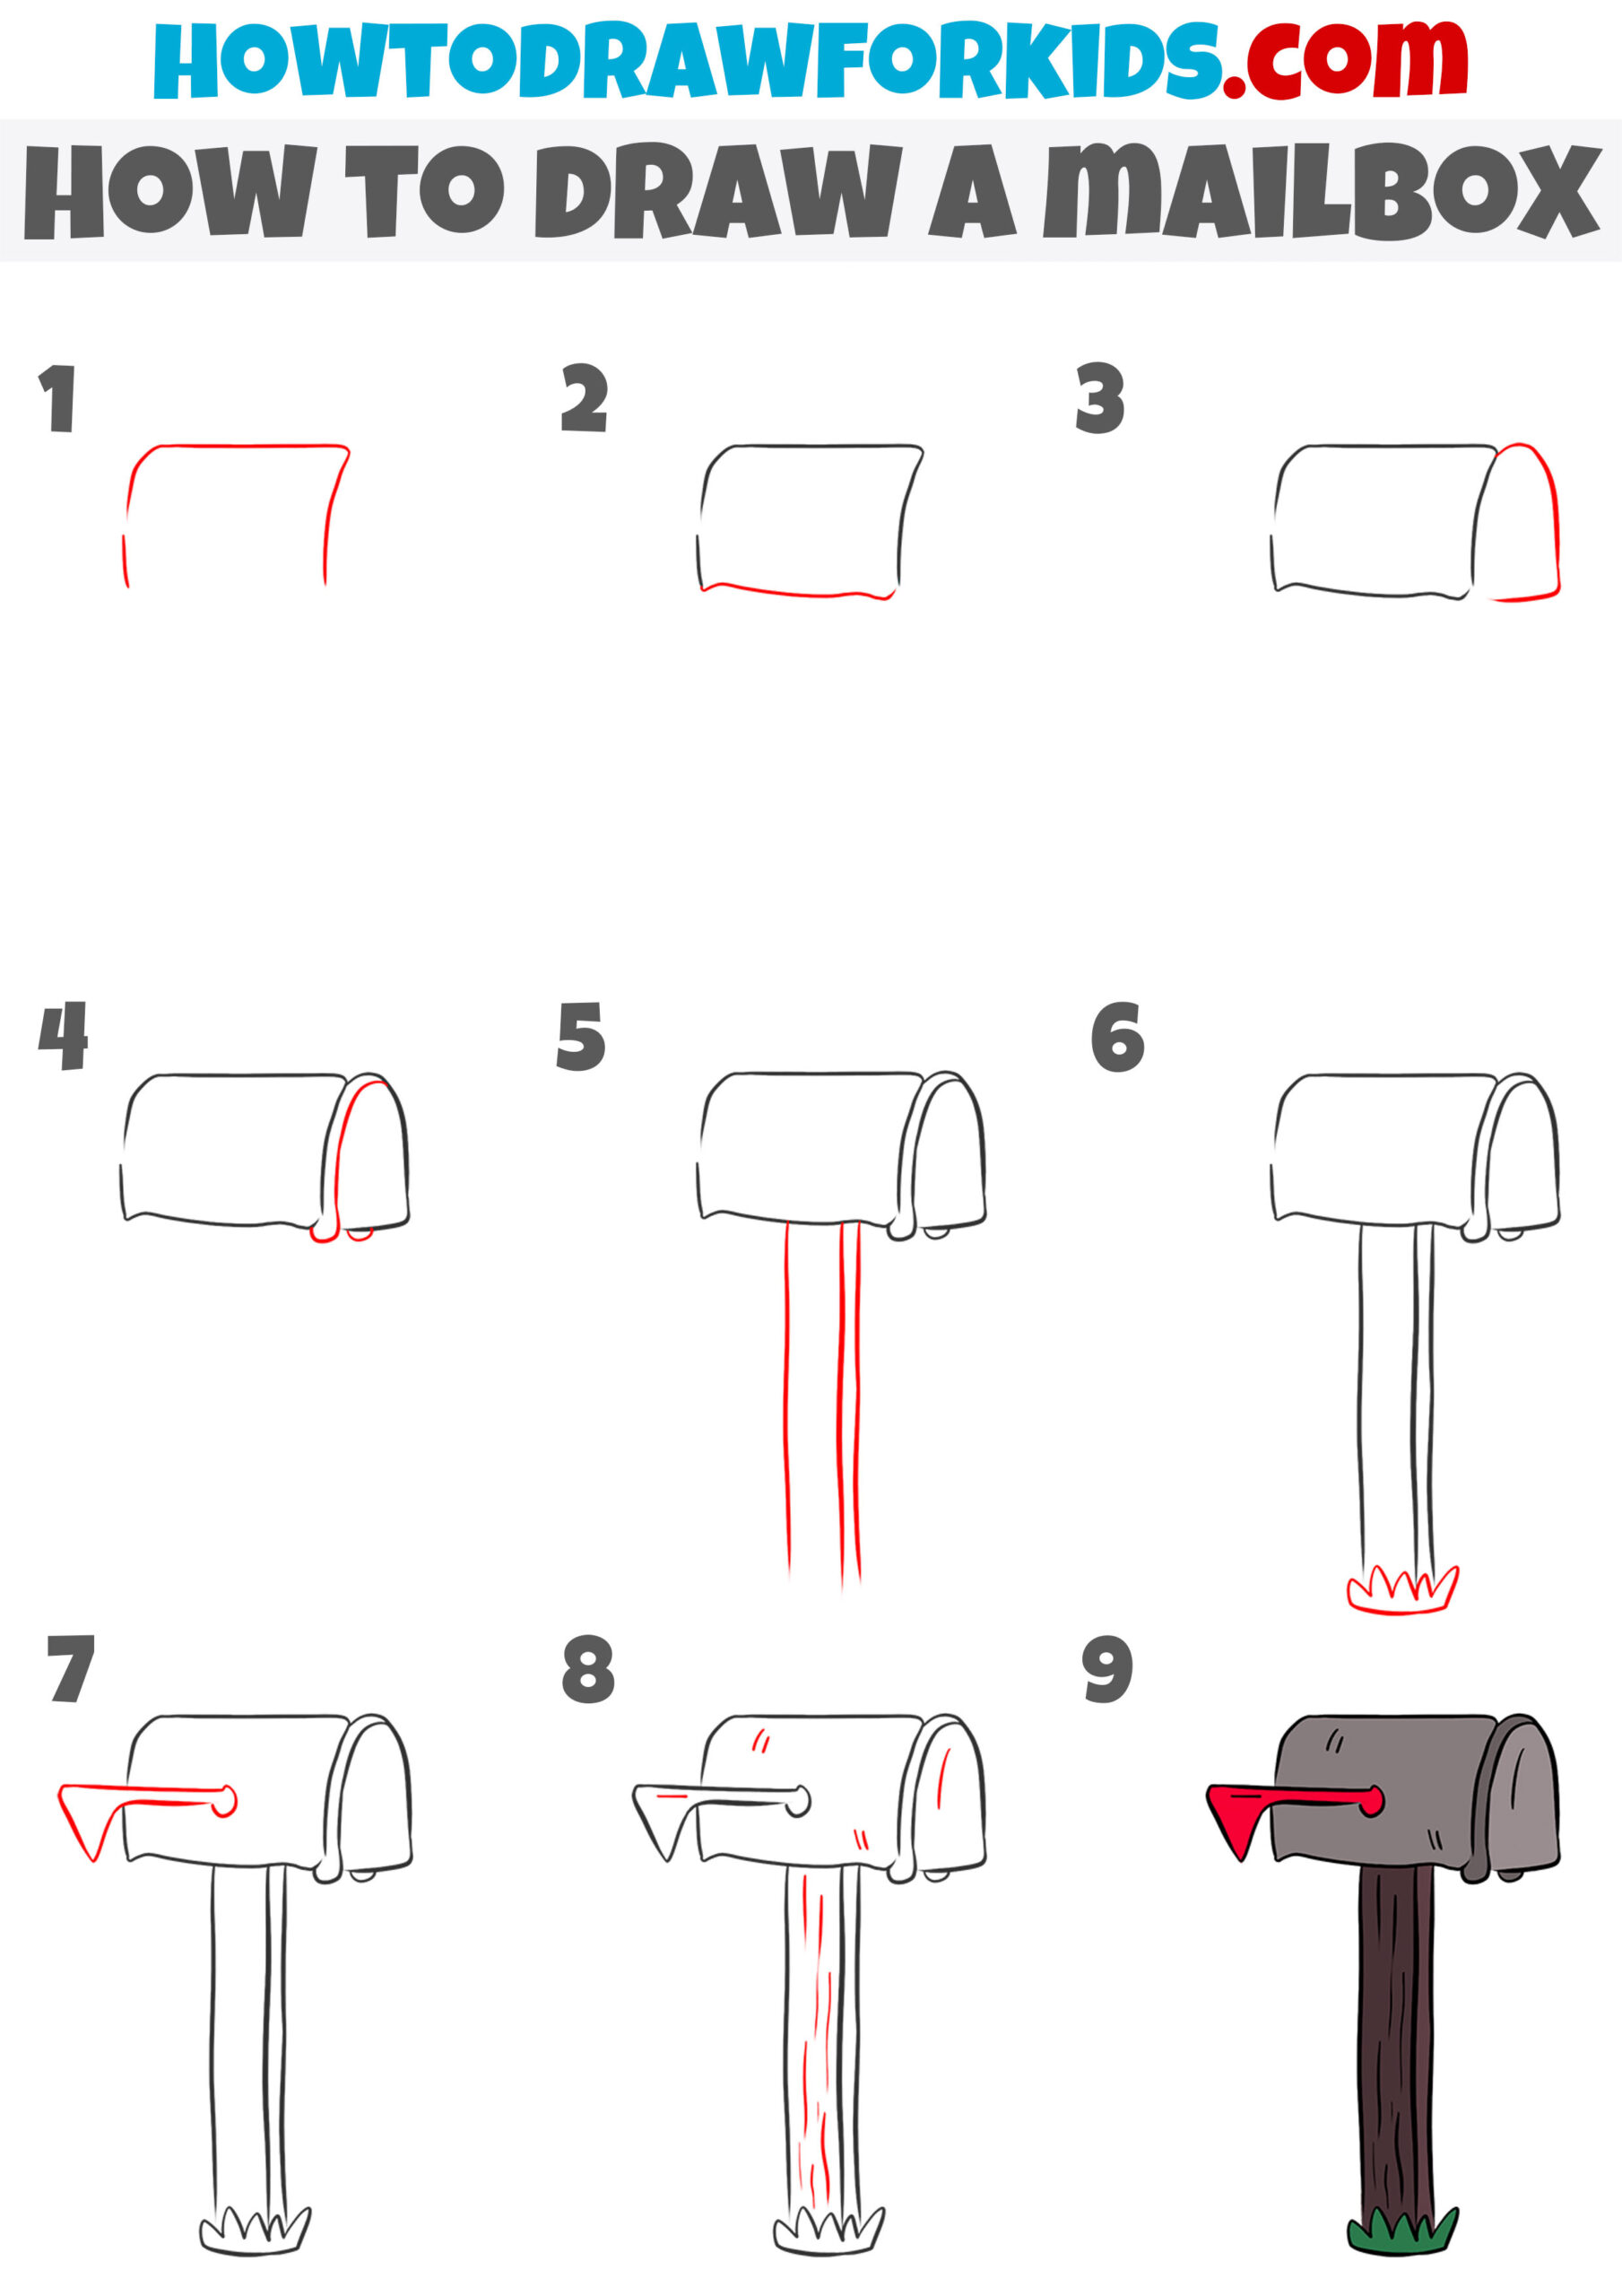 how to draw a mailbox step by step